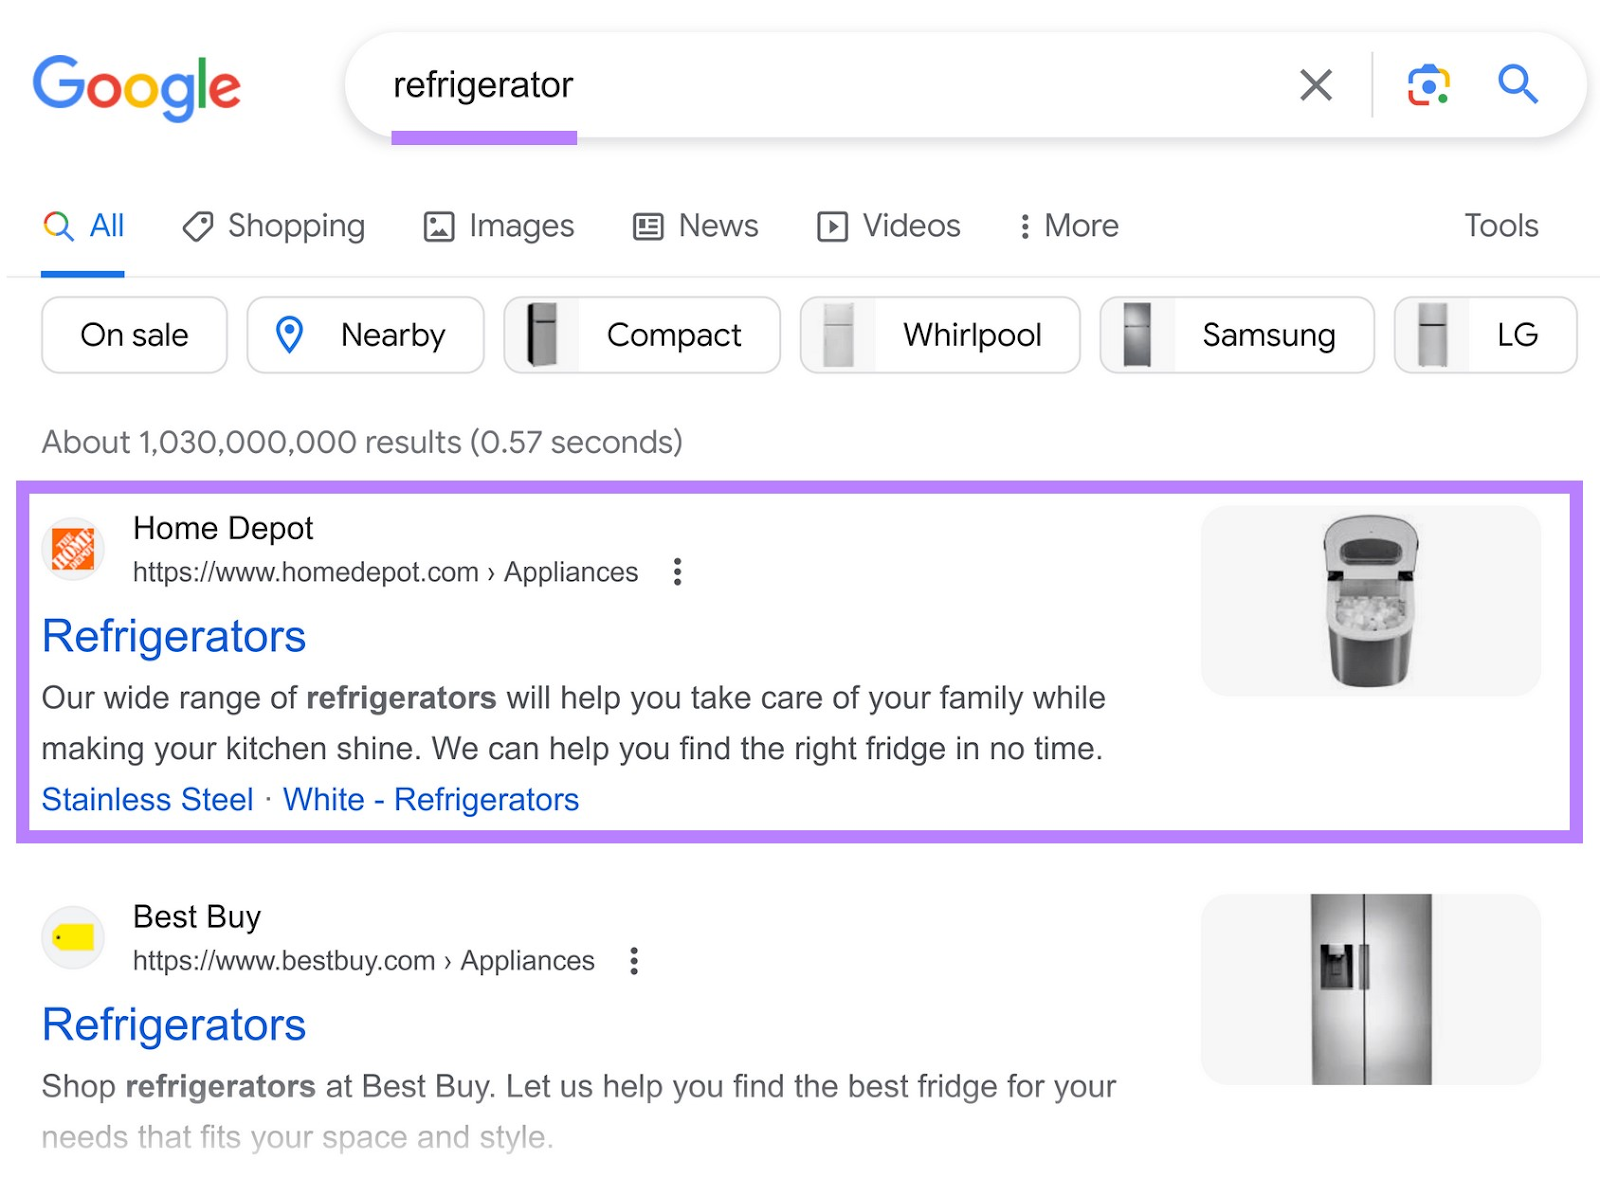 an example of Google search results for "refrigerator" with Home De، being the first